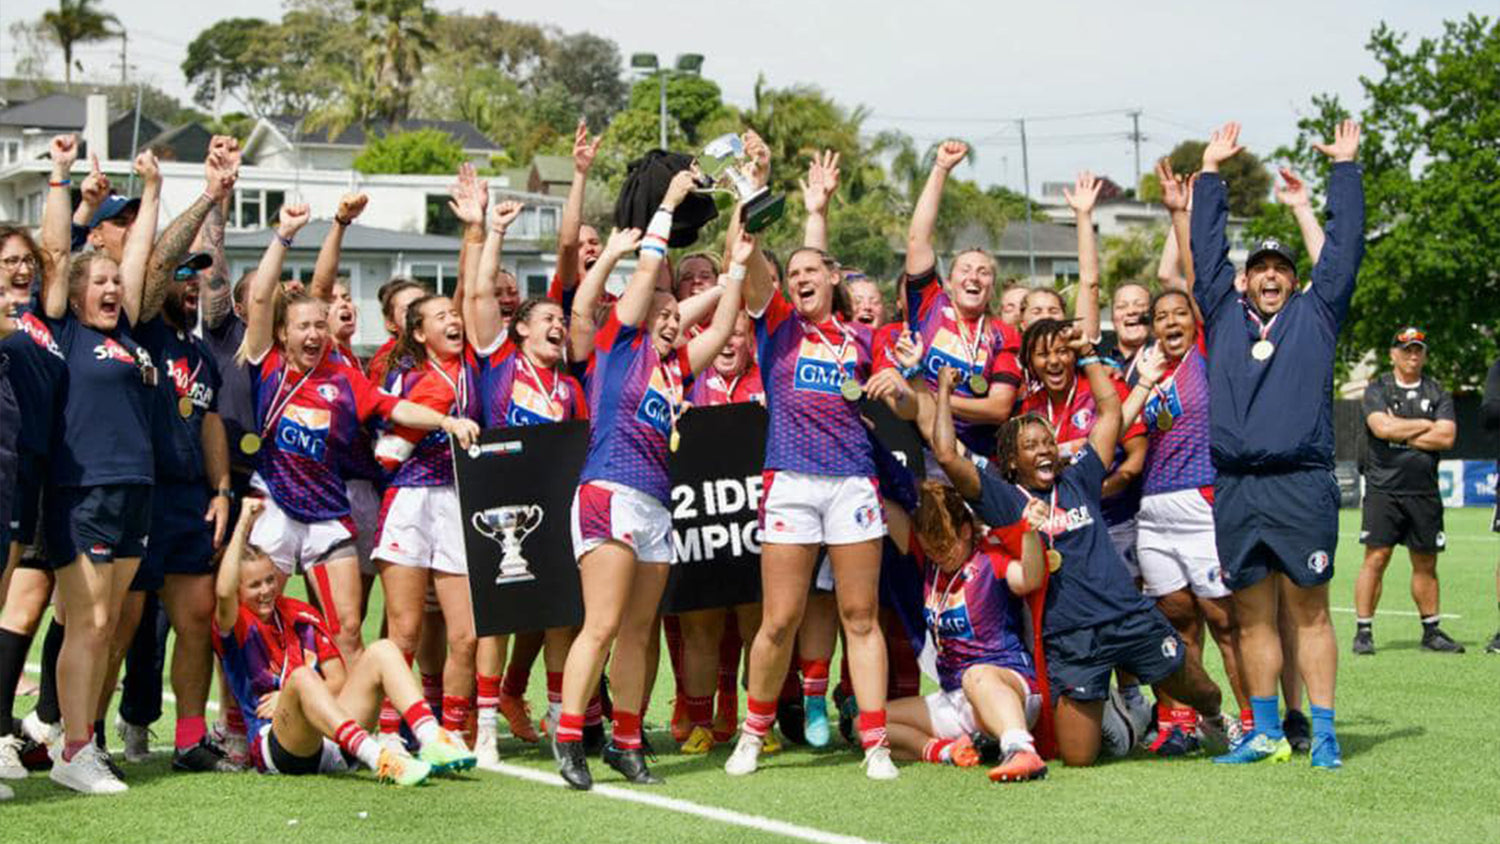 FRANCE MILITAIRE DE RUGBY FÉMININ WIN WOMEN'S INTERNATIONAL DEFENCE RUGBY COMPETITION